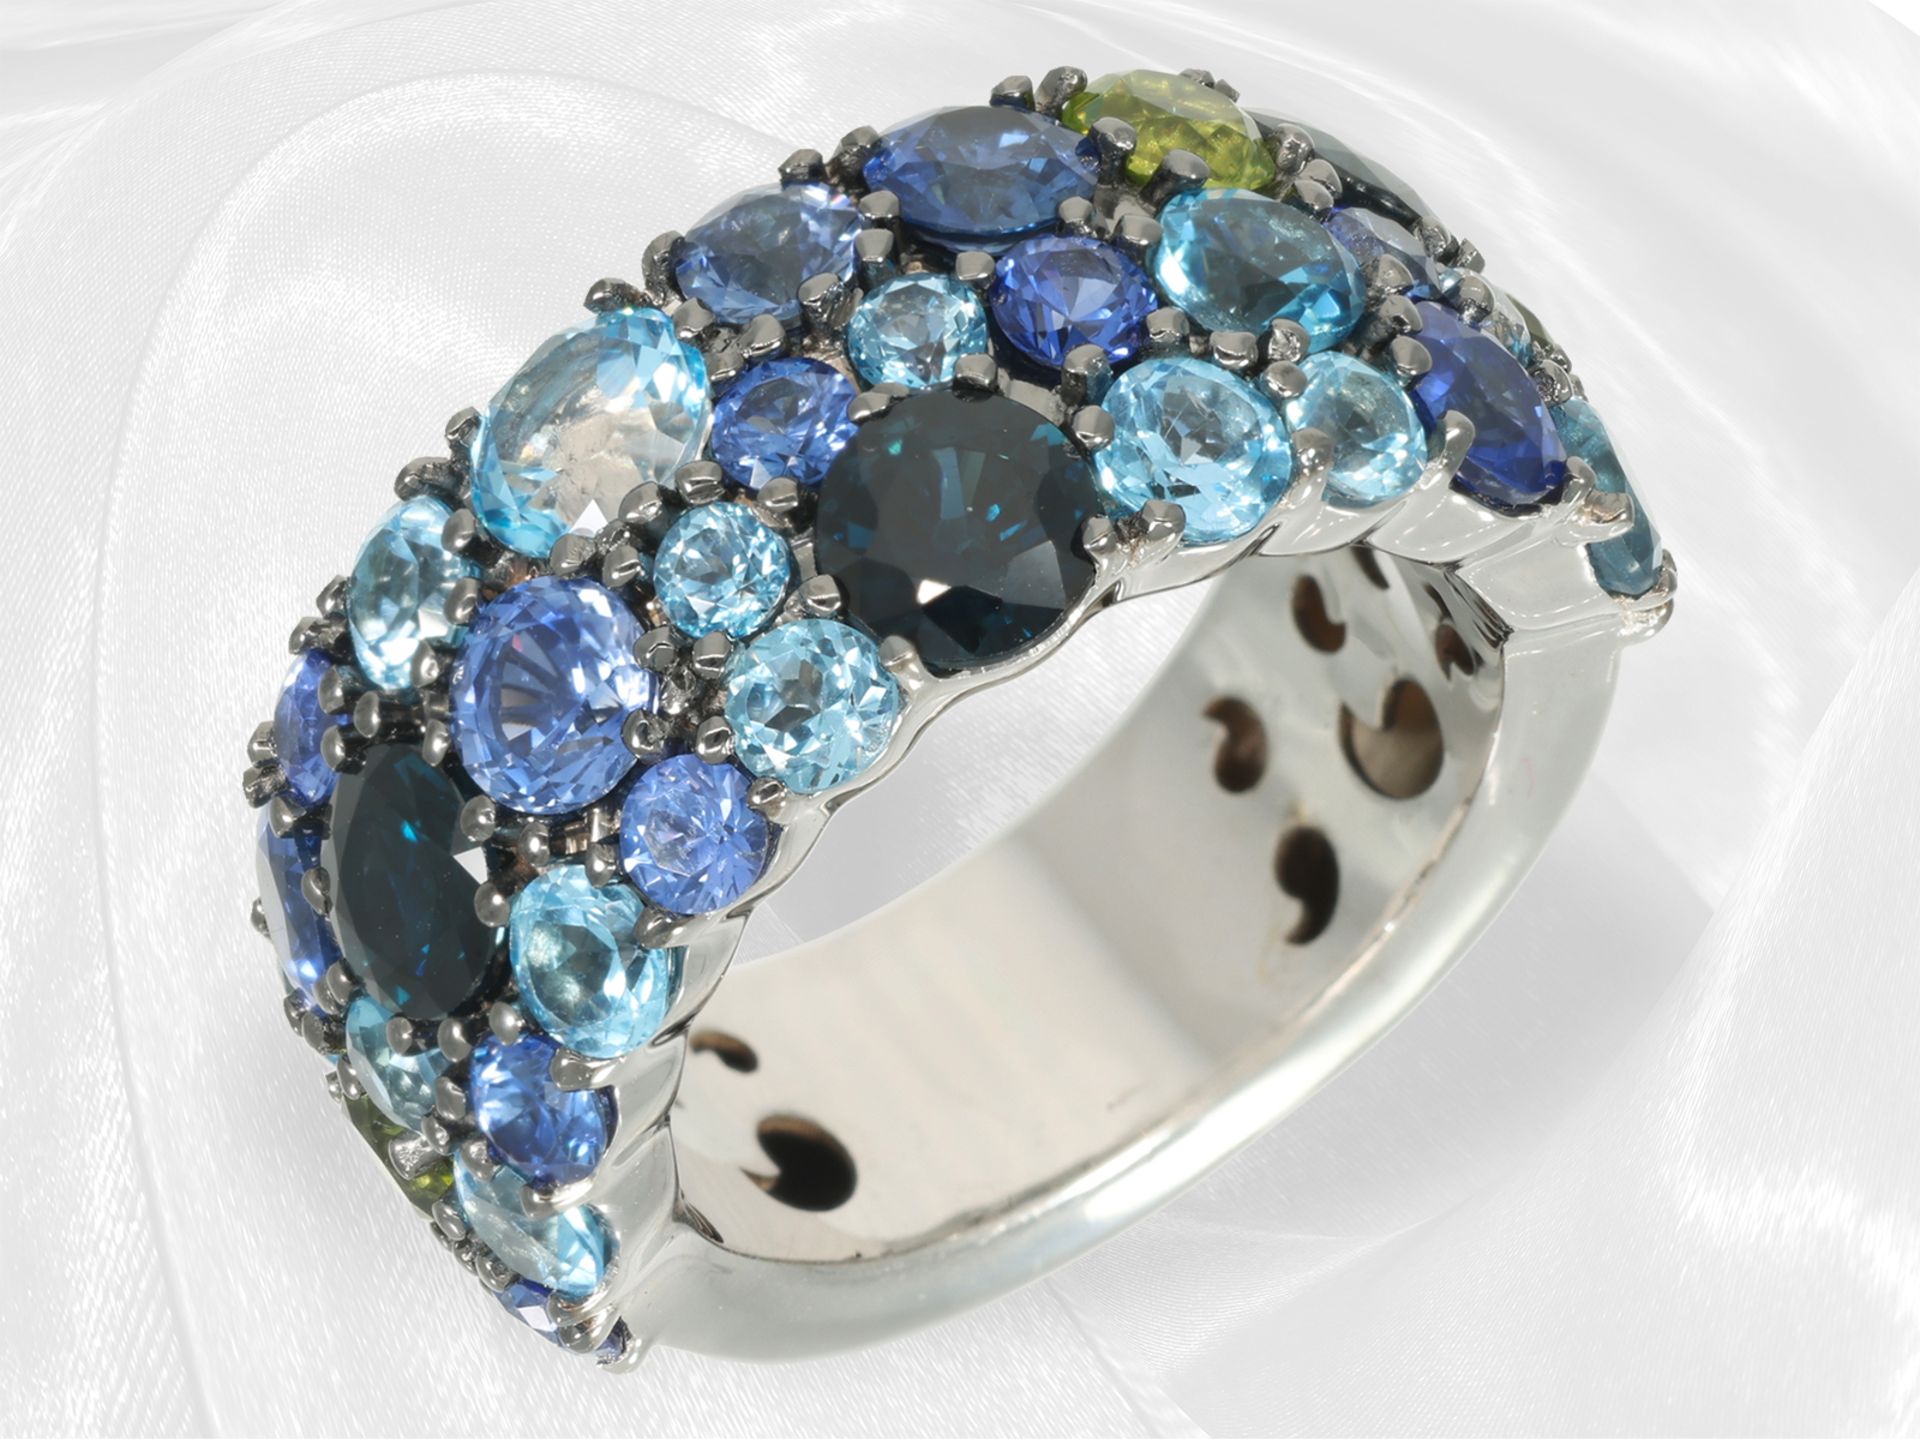 Goldsmith's ring by Cervera, model "Tiara" with sapphires, topazes and peridots, unworn - Image 4 of 6